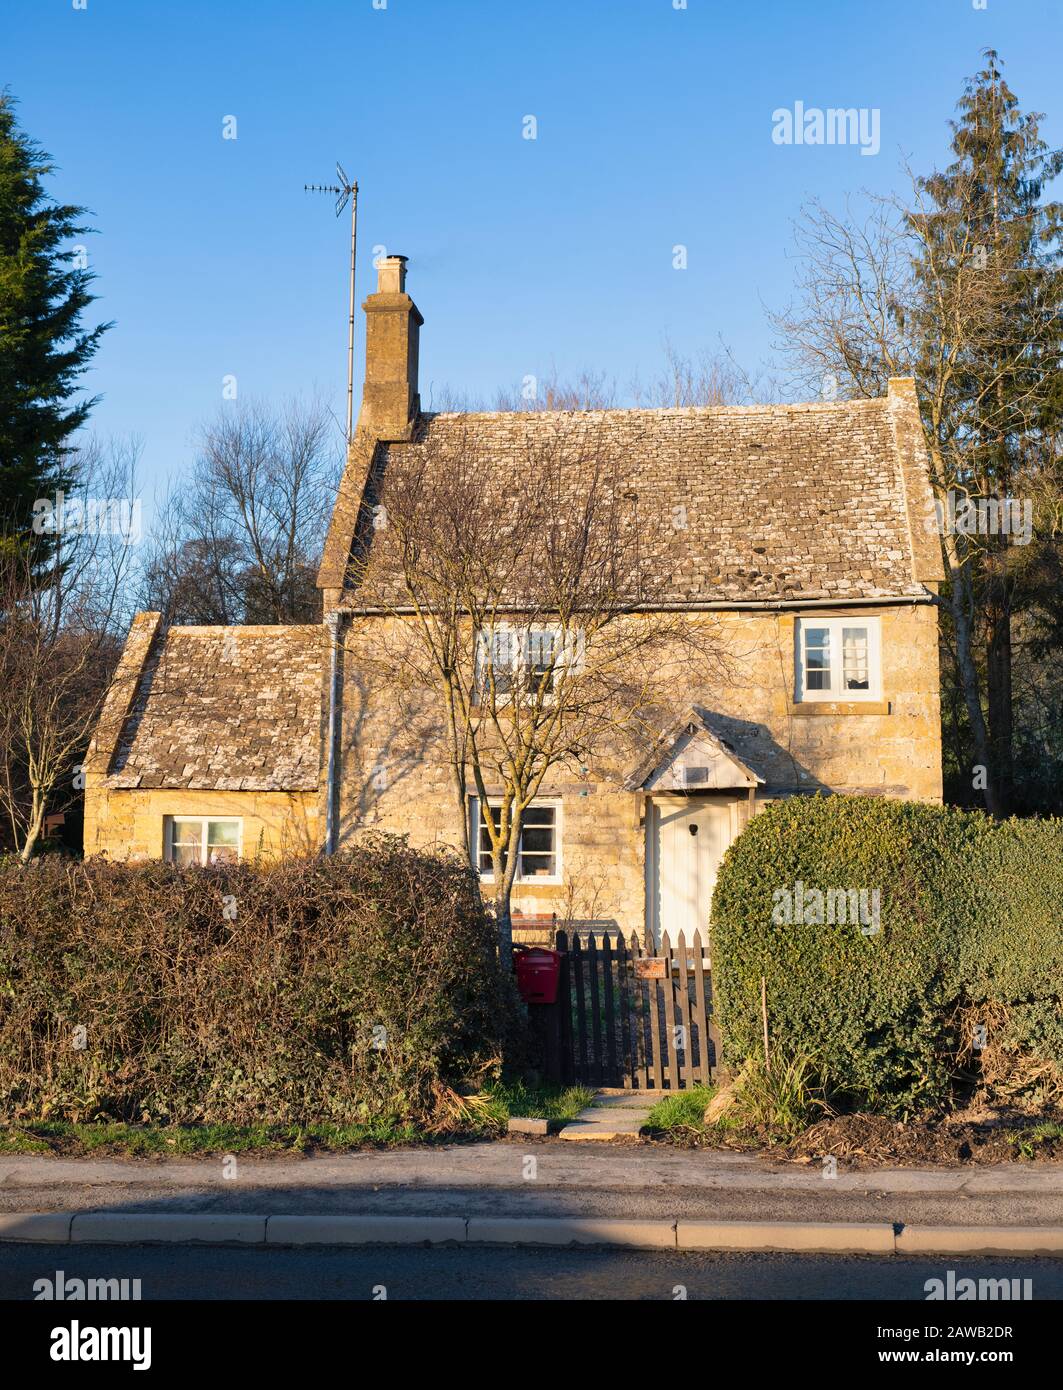 Cotswold cottage in pietra nel pomeriggio luce invernale. Vicino Stanway, Cotswolds, Gloucestershire, Inghilterra Foto Stock